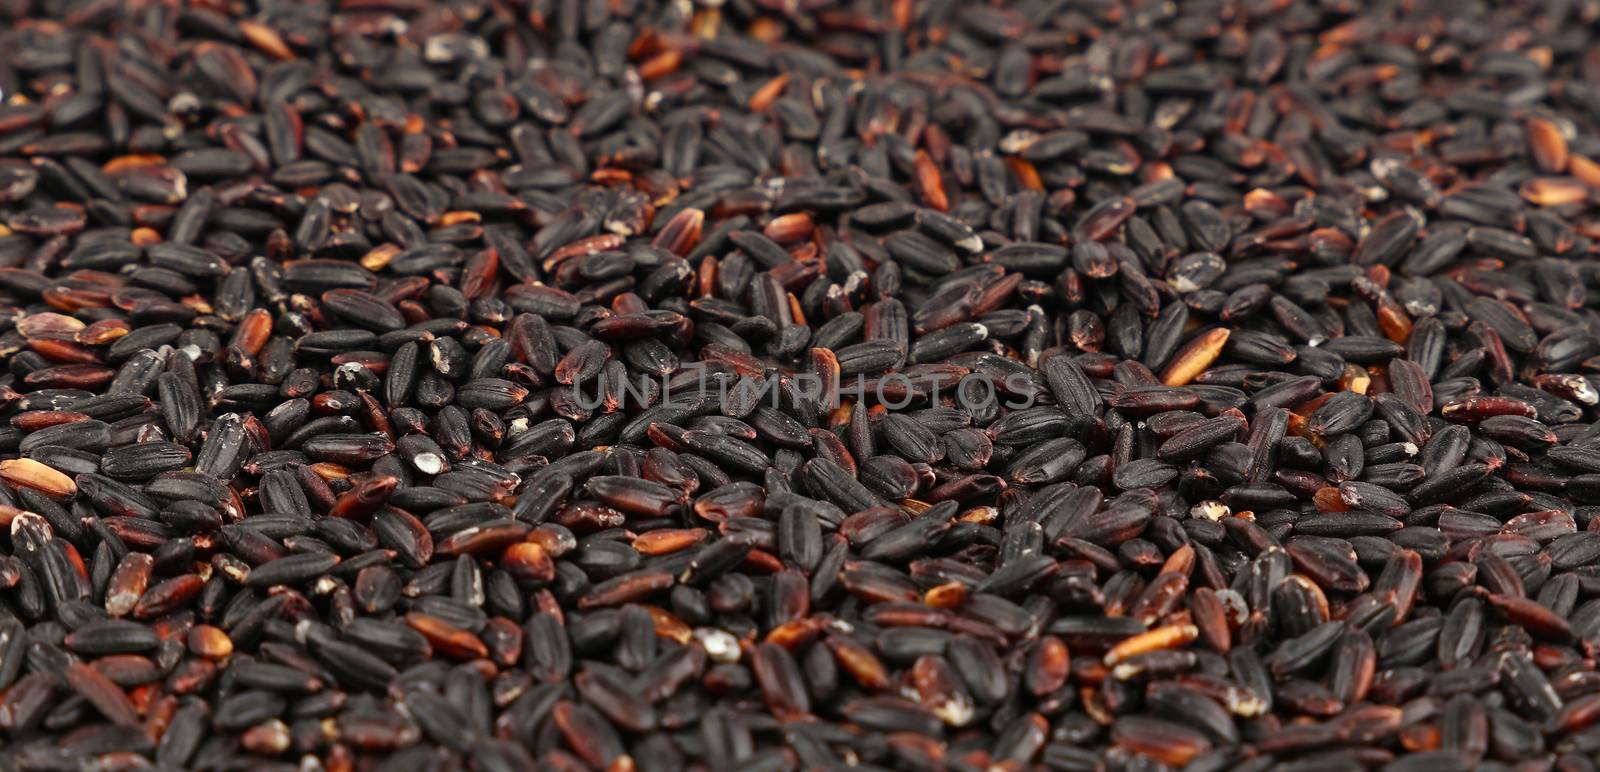 Black purple raw unhulled long grain rice close up pattern background, low angle view, selective focus